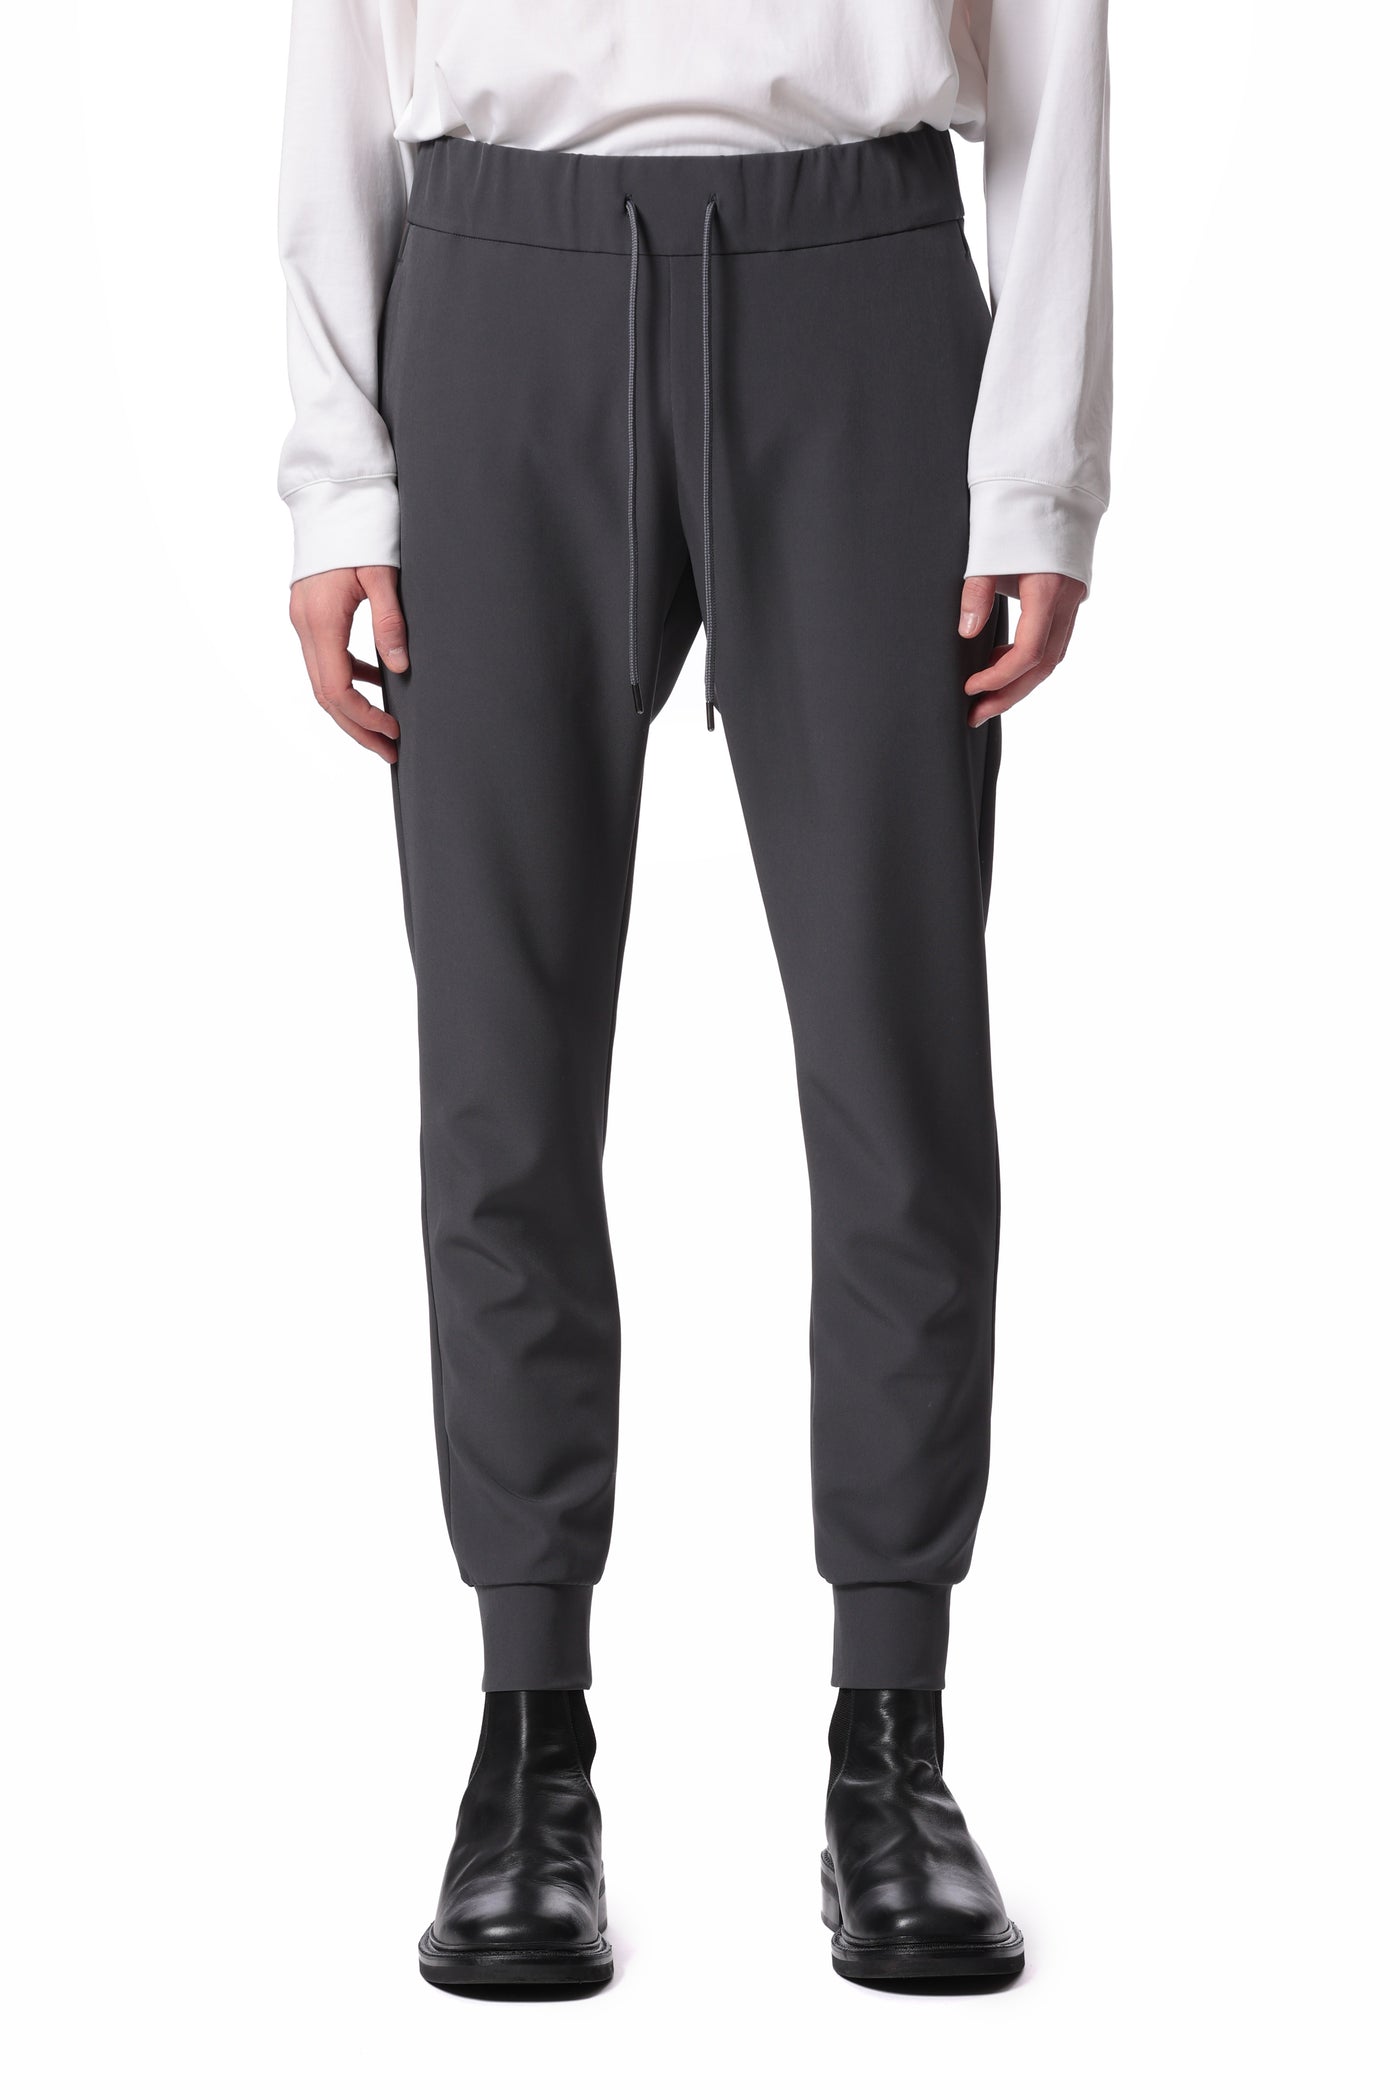 AP41-028 Polyester high count double cross jogger pants